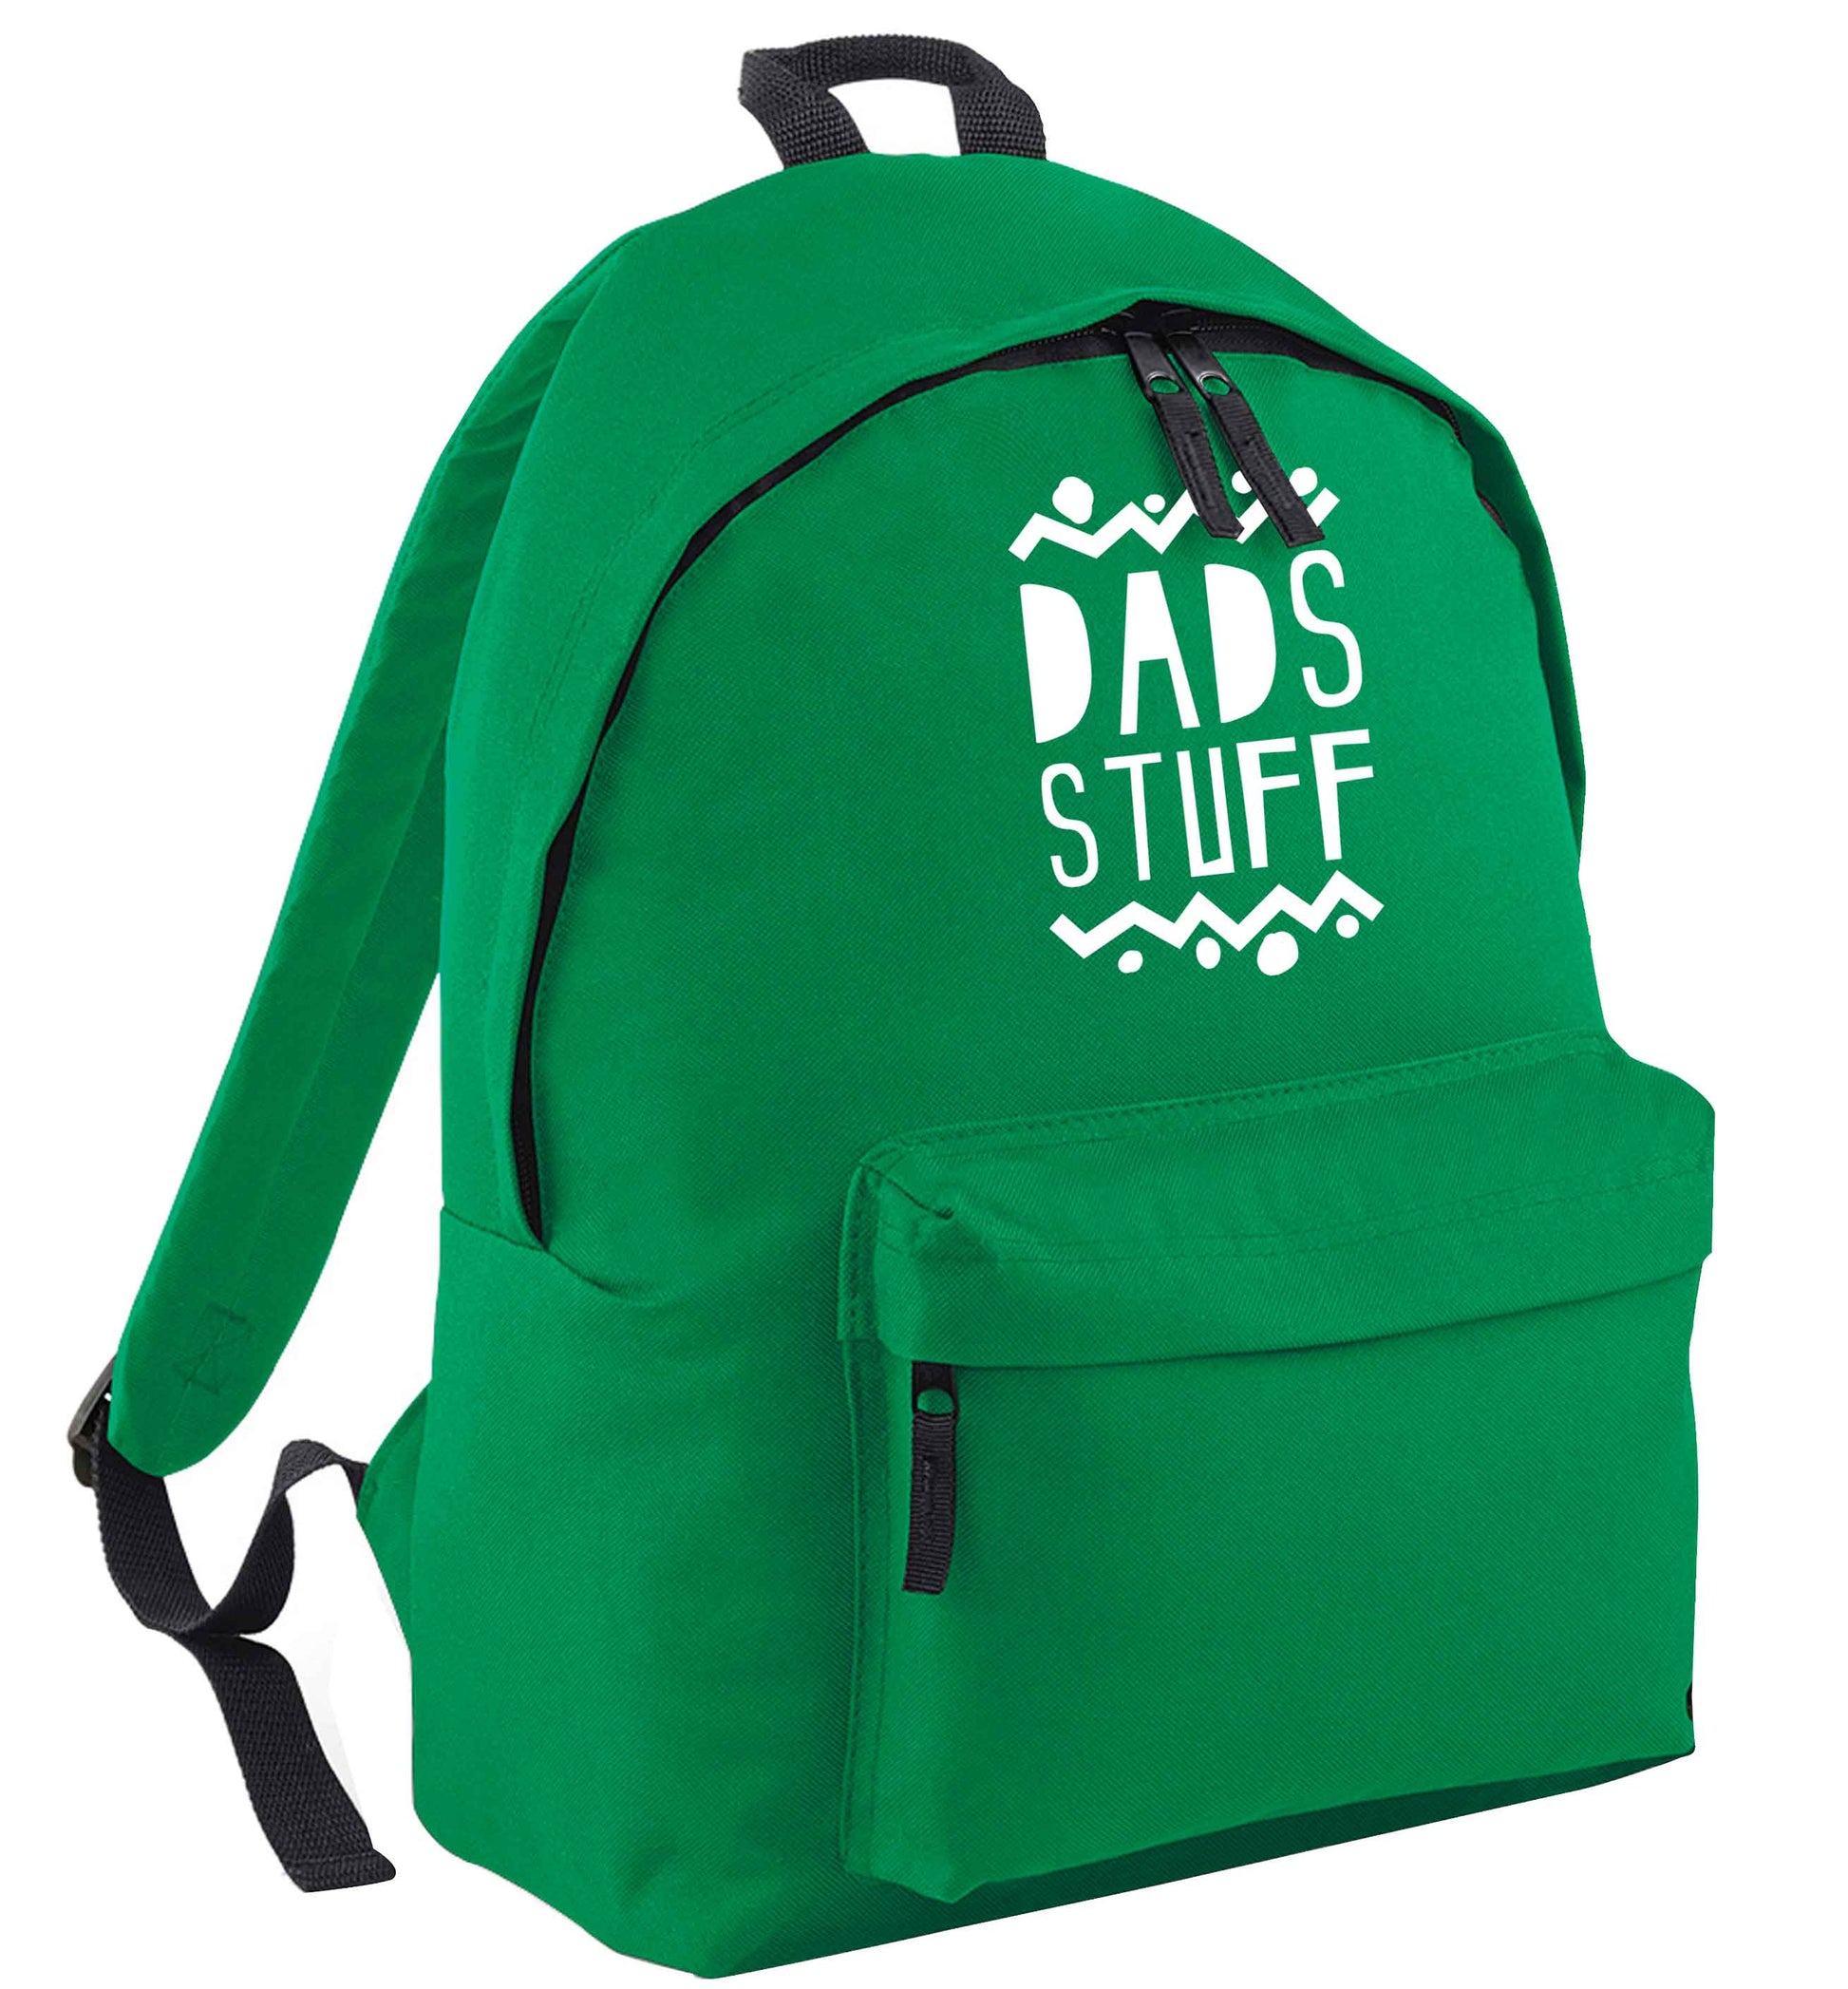 Dads stuff green adults backpack